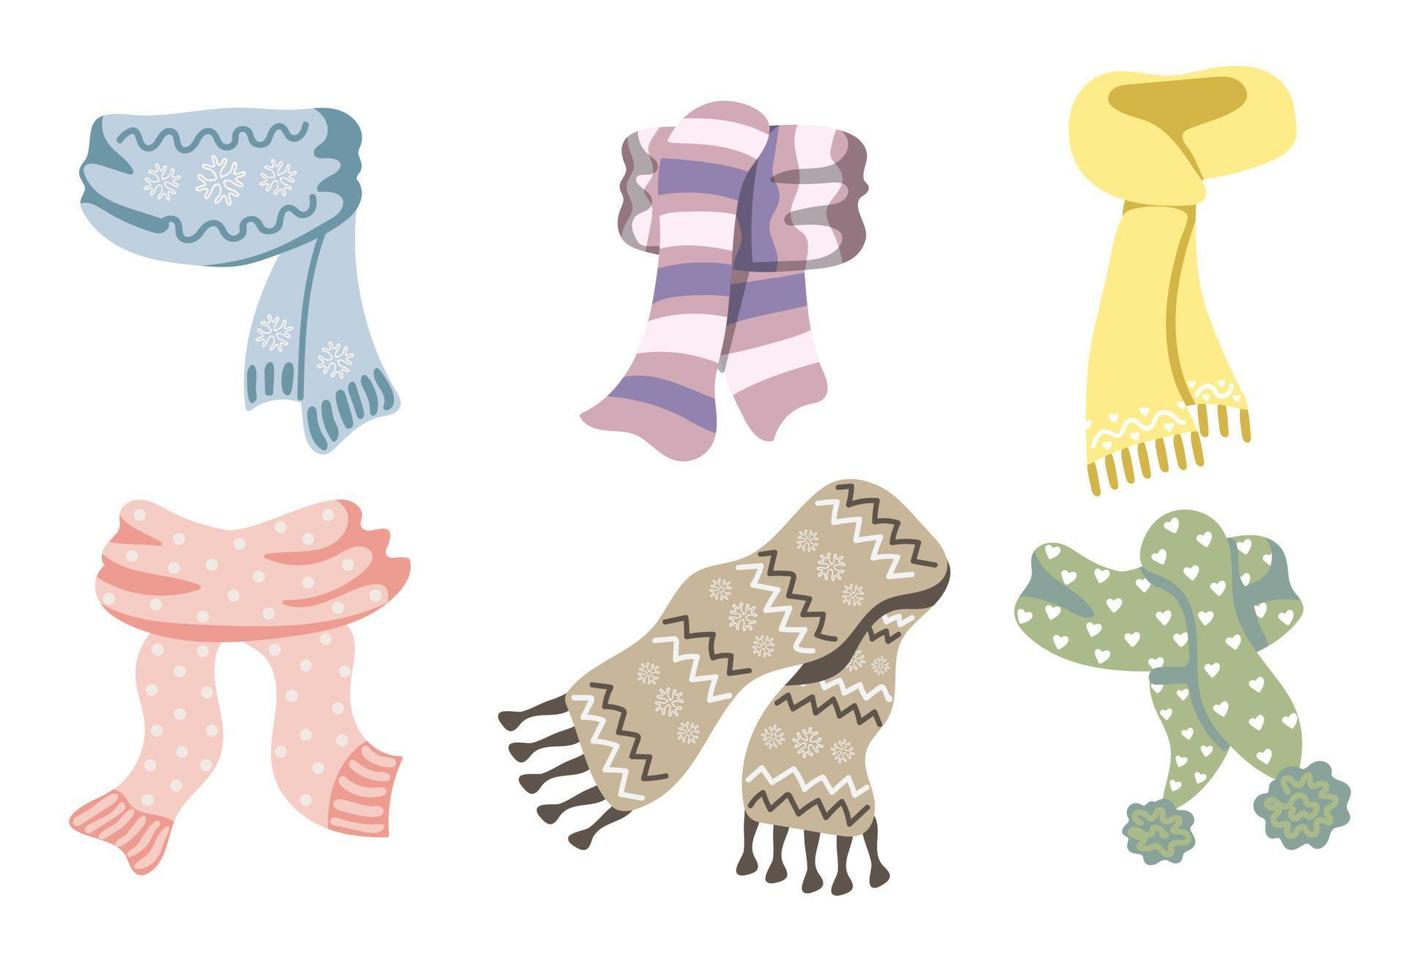 Colorful knitted winter scarves set. Cute hand drawn elements for winter design vector